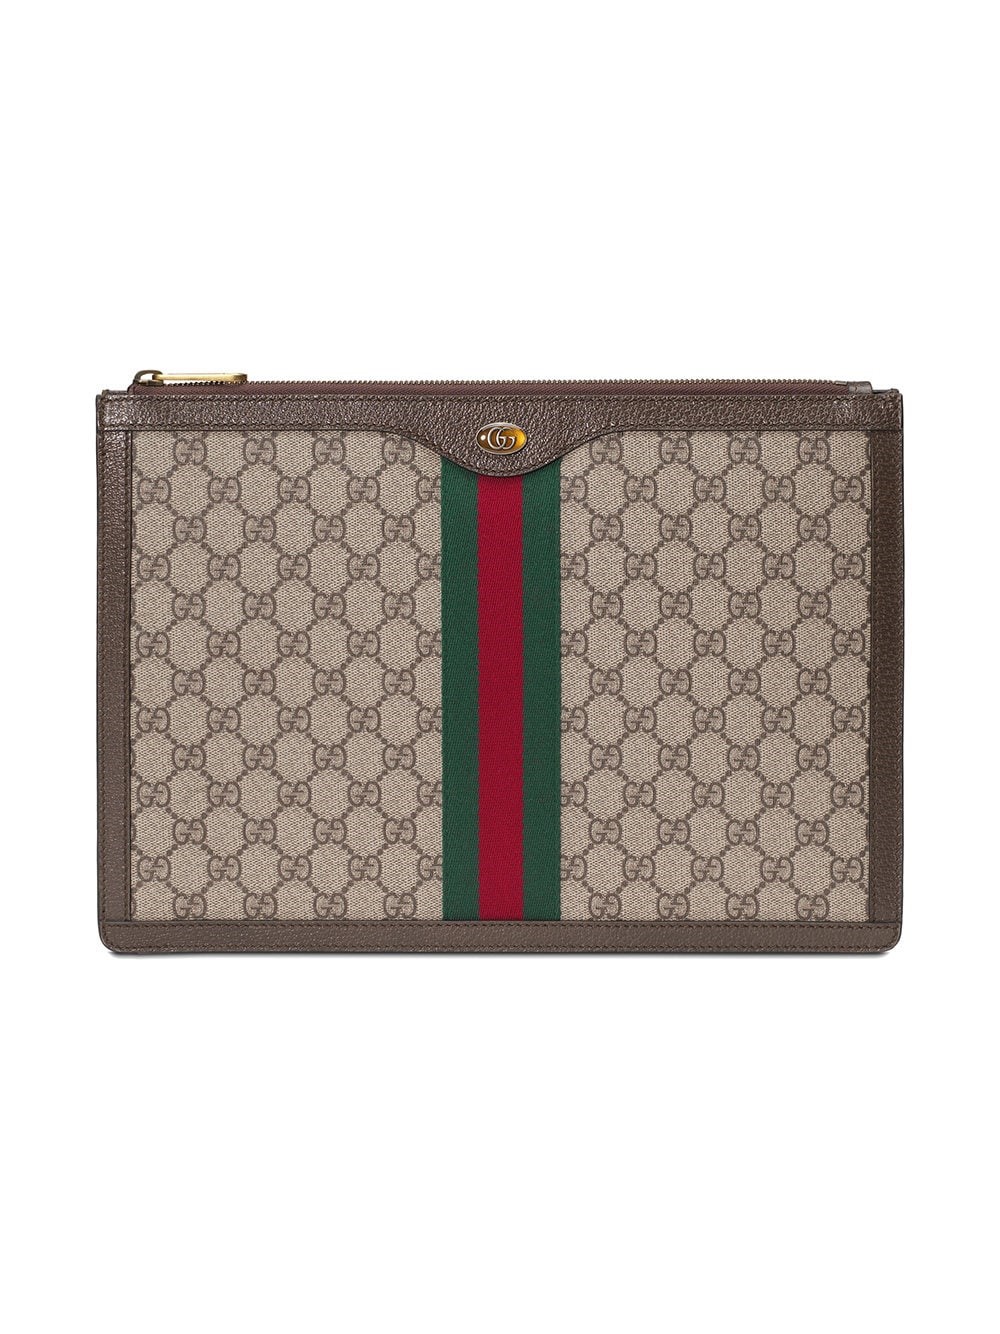 gucci GG SUPREME CLUTCH available on 